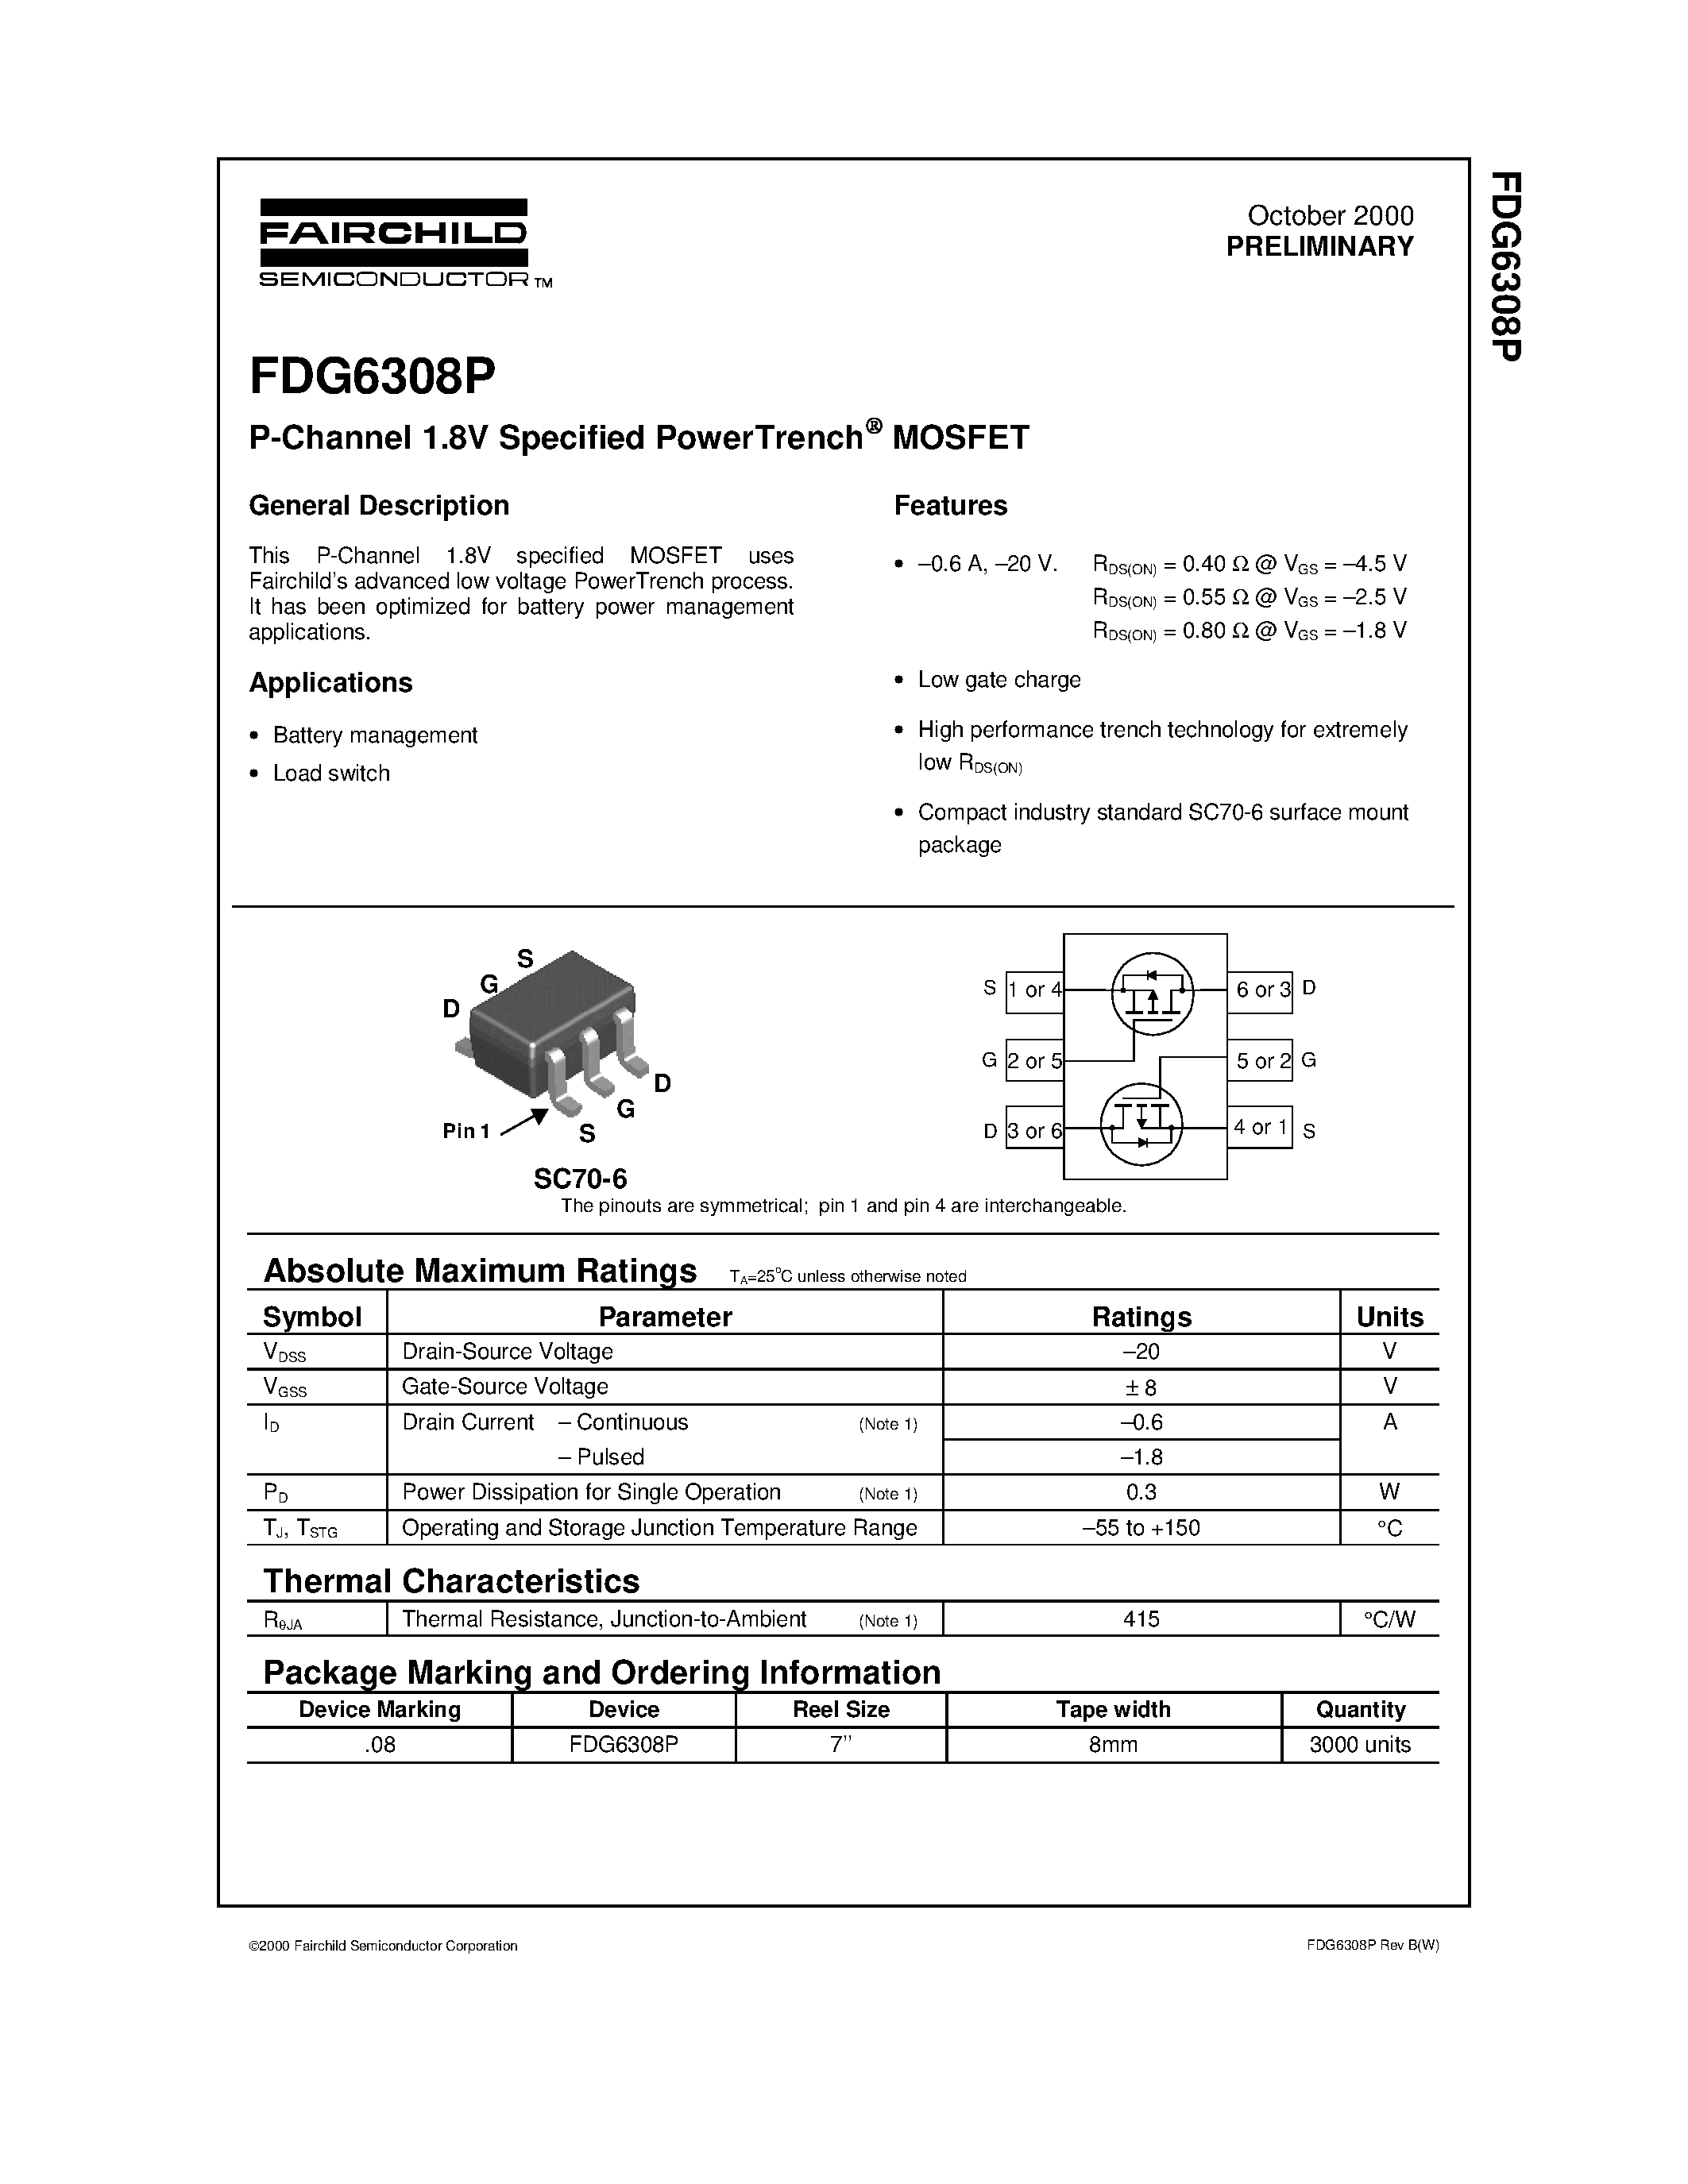 Даташит FDG6308P - P-Channel 1.8V Specified PowerTrench MOSFET страница 1